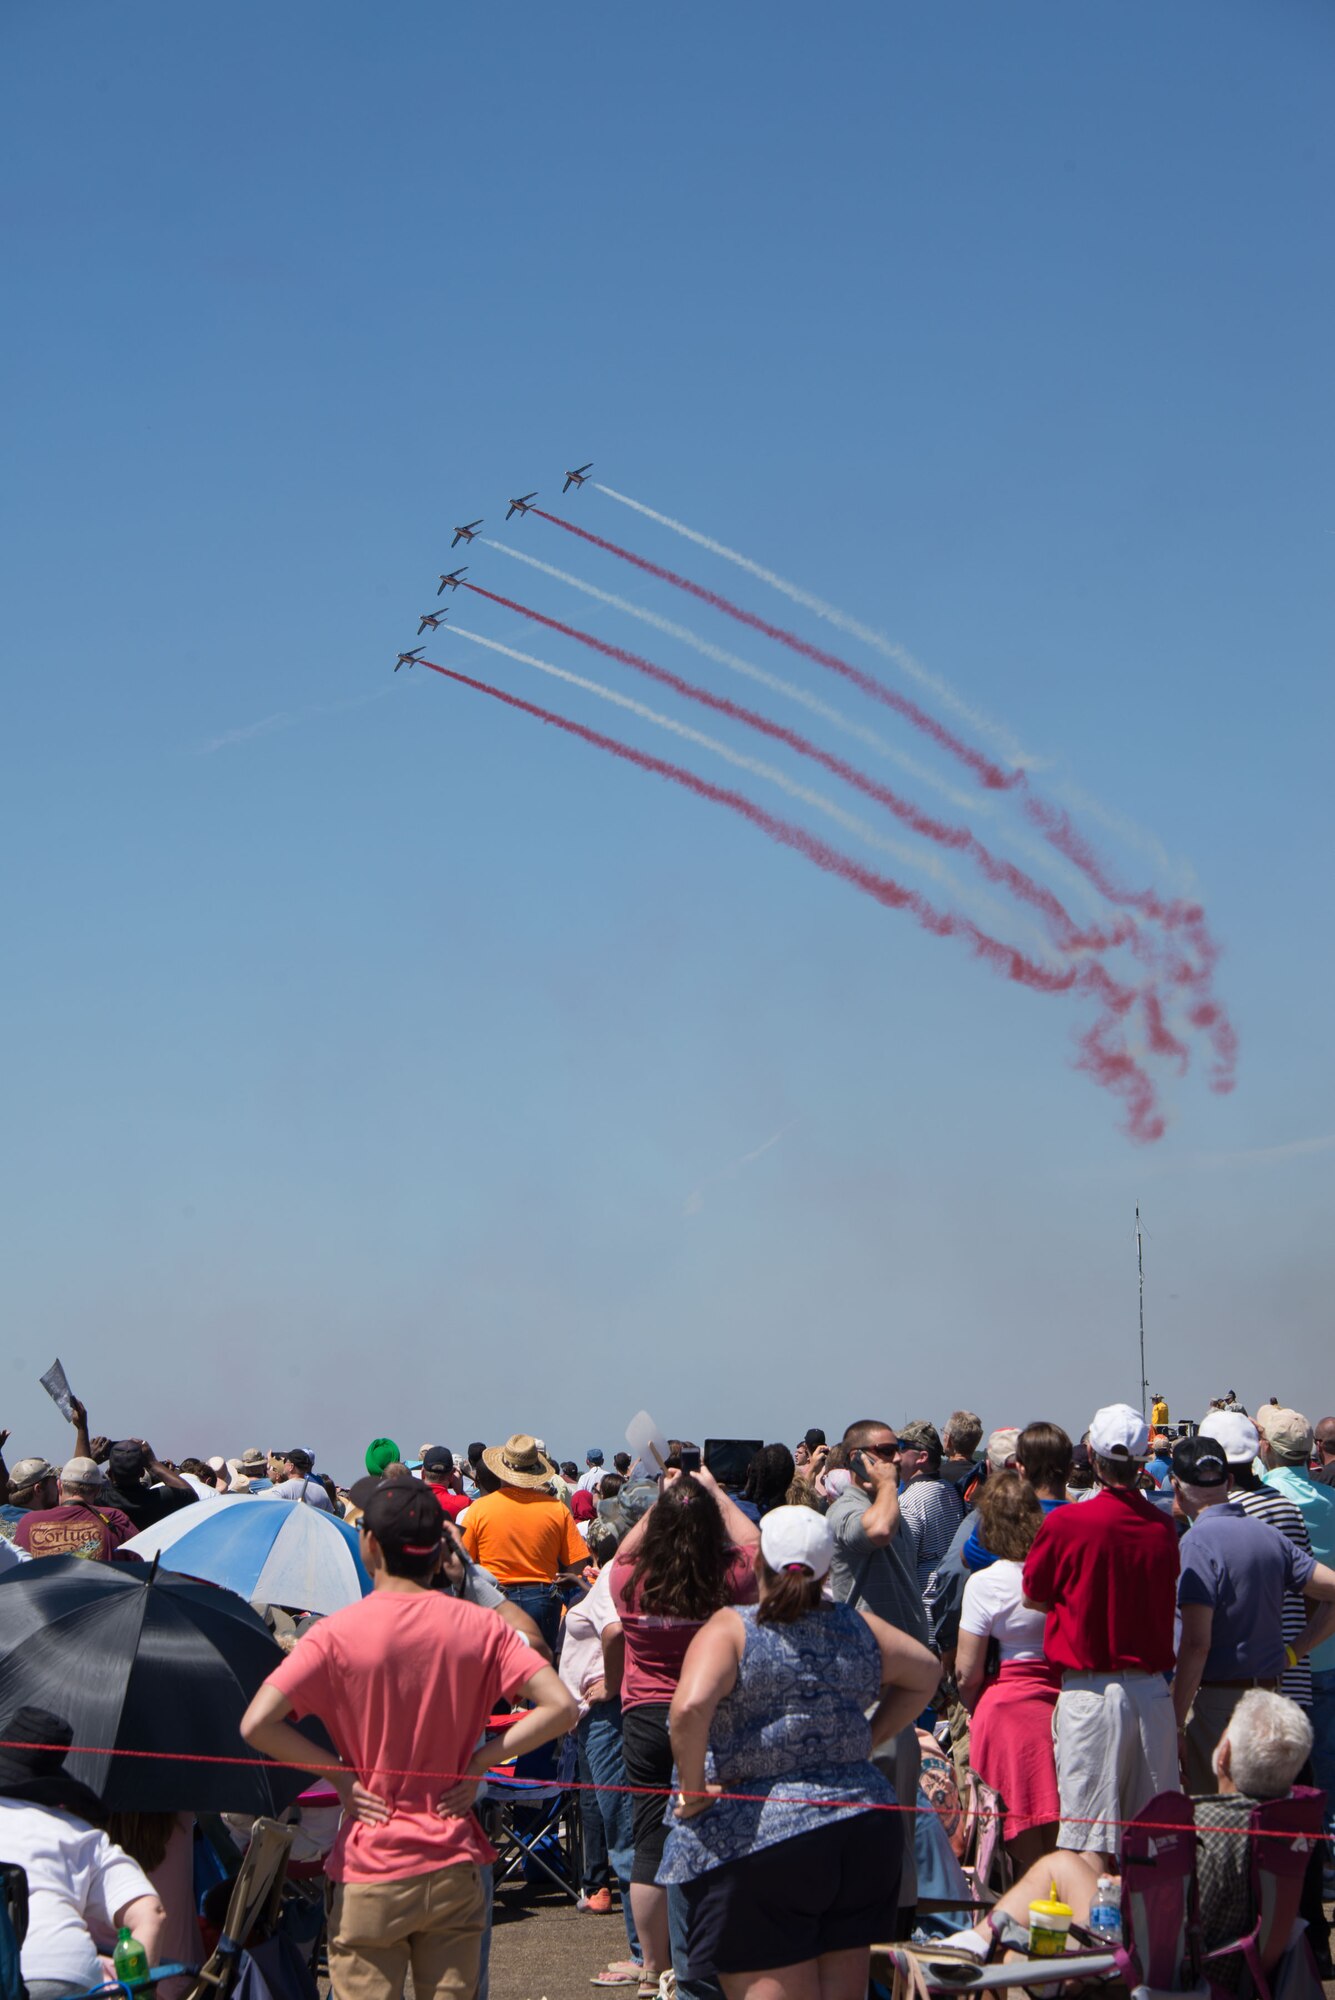 The 2017 Maxwell Air Force Base “Heritage to Horizon” Air Show drew a crowd of about 160,000 people during the two-day show, April 8-9, 2017. Aerial demonstration acts included the U.S. Air Force Thunderbirds and the French Patrouille de France (pictured). The International Council of Air Shows awarded Maxwell the Dick Schram Memorial Community Relations Award for having the best air show in 2017. (U.S. Air Force photo by Trey Ward)